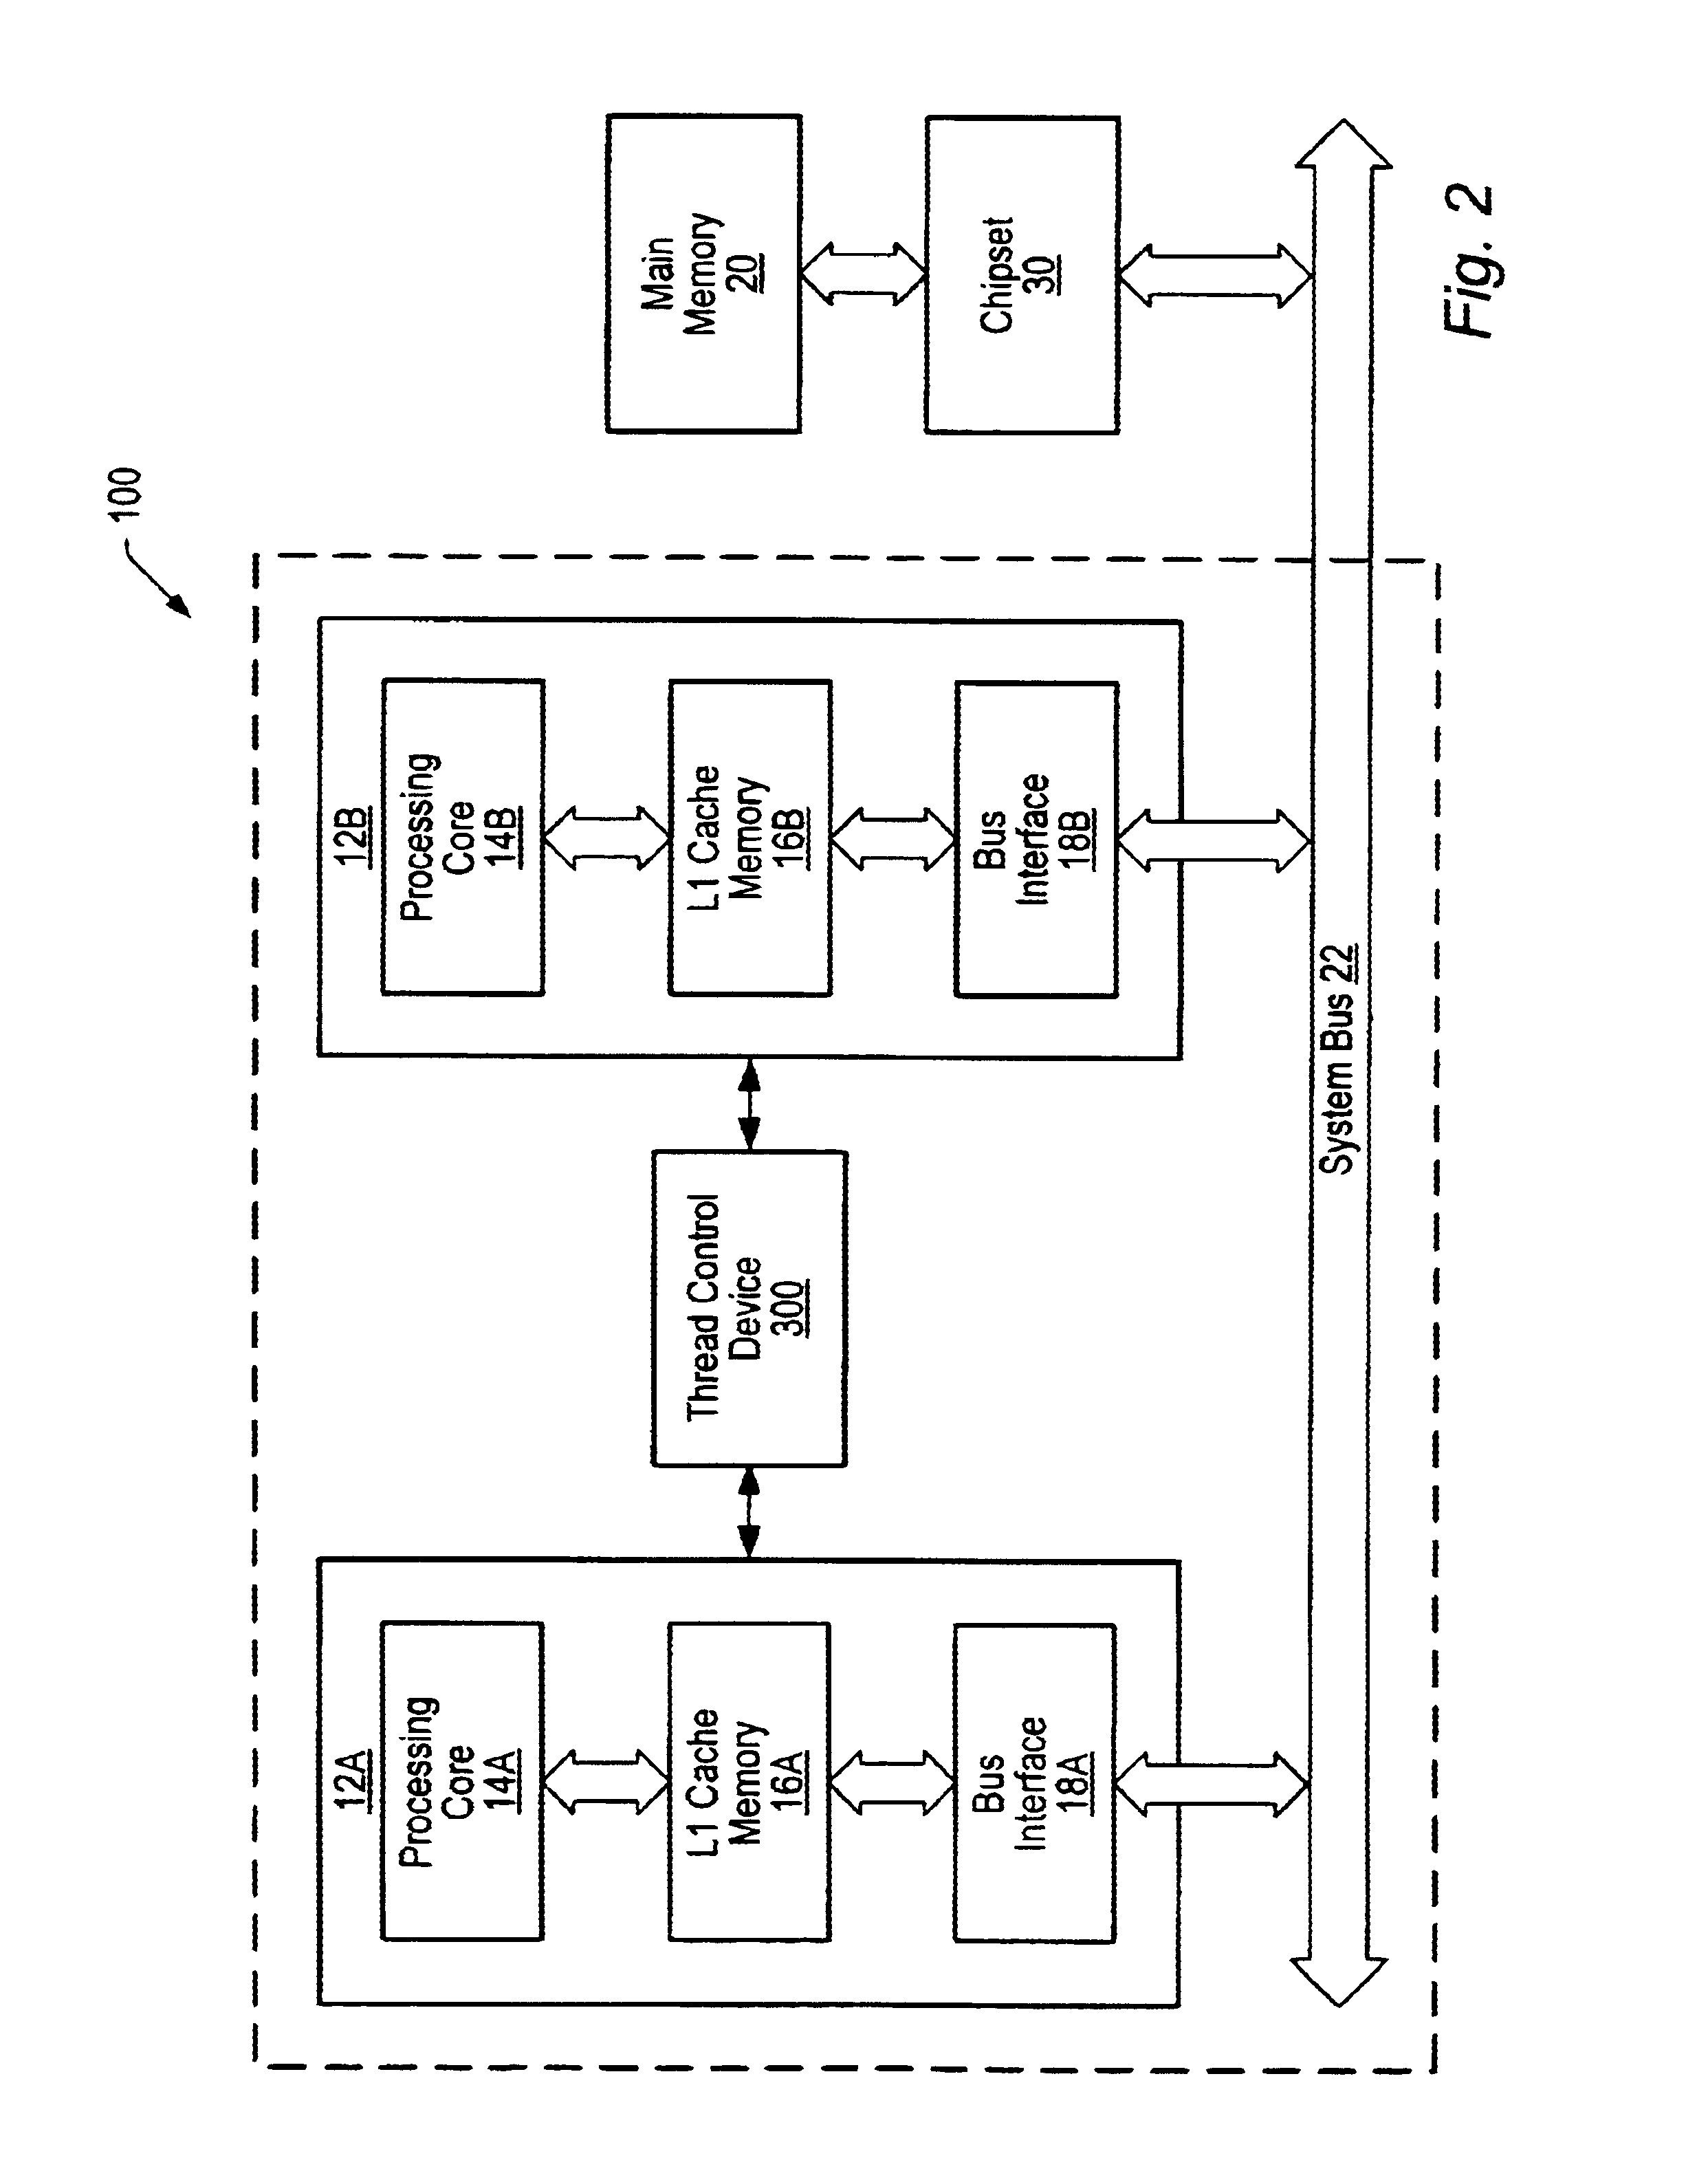 Exception handling with reduced overhead in a multithreaded multiprocessing system